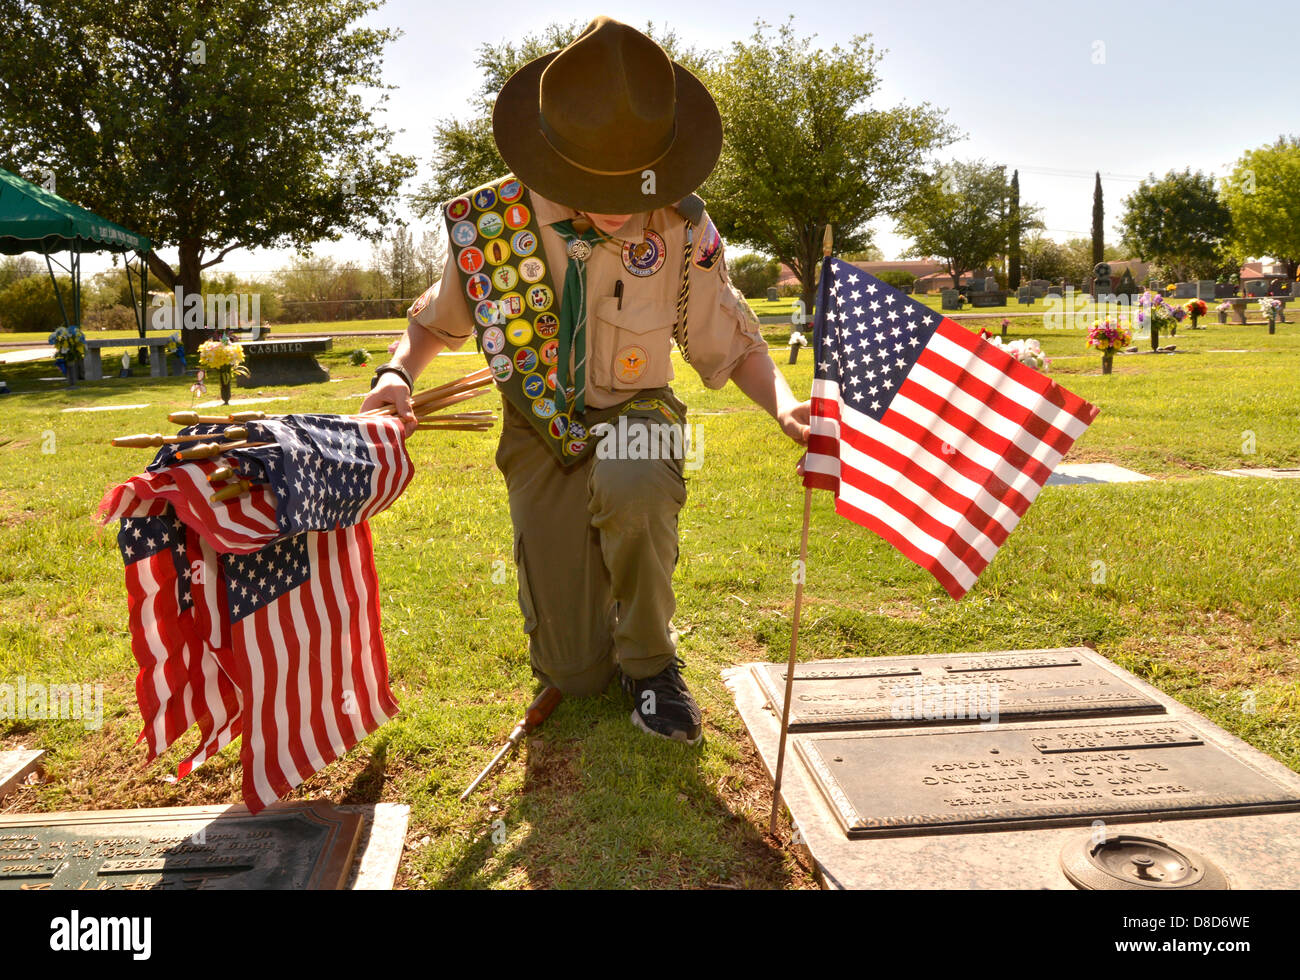 East Lawn Palms Cemetery, Tucson, Arizona, USA. 25th May 2013.  Boy Scout, Ray Langlais, 13, of the Catalina Council Troop 141 places flags on May 25, 2013 at the graves of deceased U.S. military veterans in preparation for Monday's Memorial Day services at East Lawn Palms Cemetery, Tucson, Arizona, USA.  Langlais says that he helps place the flags to 'help my country'.  His father, Ray Langlais Sr. added that placing the flags at the graves 'reminds people of what Memorial Day is supposed to be .  It's a remembrance of people who served our country.' Credit: Norma Jean Gargasz/Alamy Live News Stock Photo